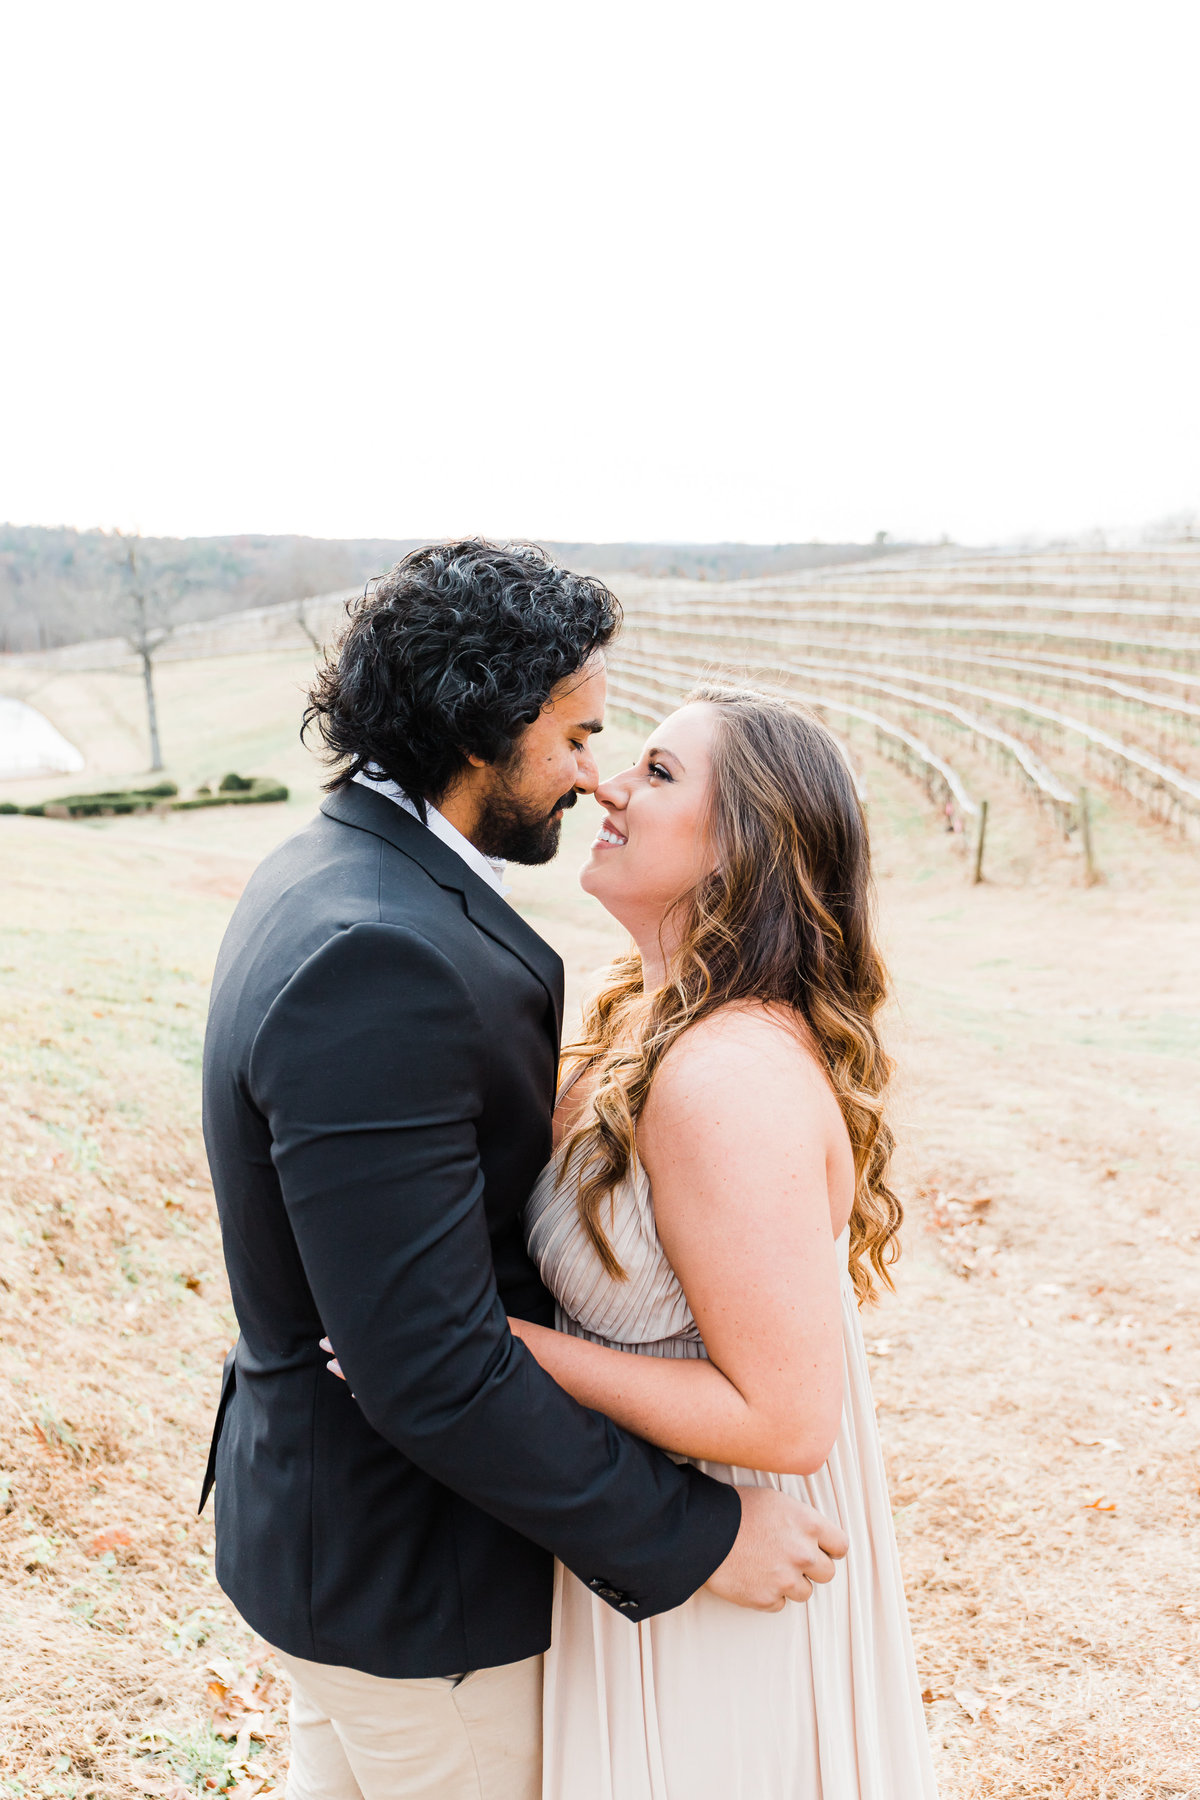 Motaluce Winery, Gainesville, GA Couple Engagement Anniversary Photography Session by Renee Jael-4